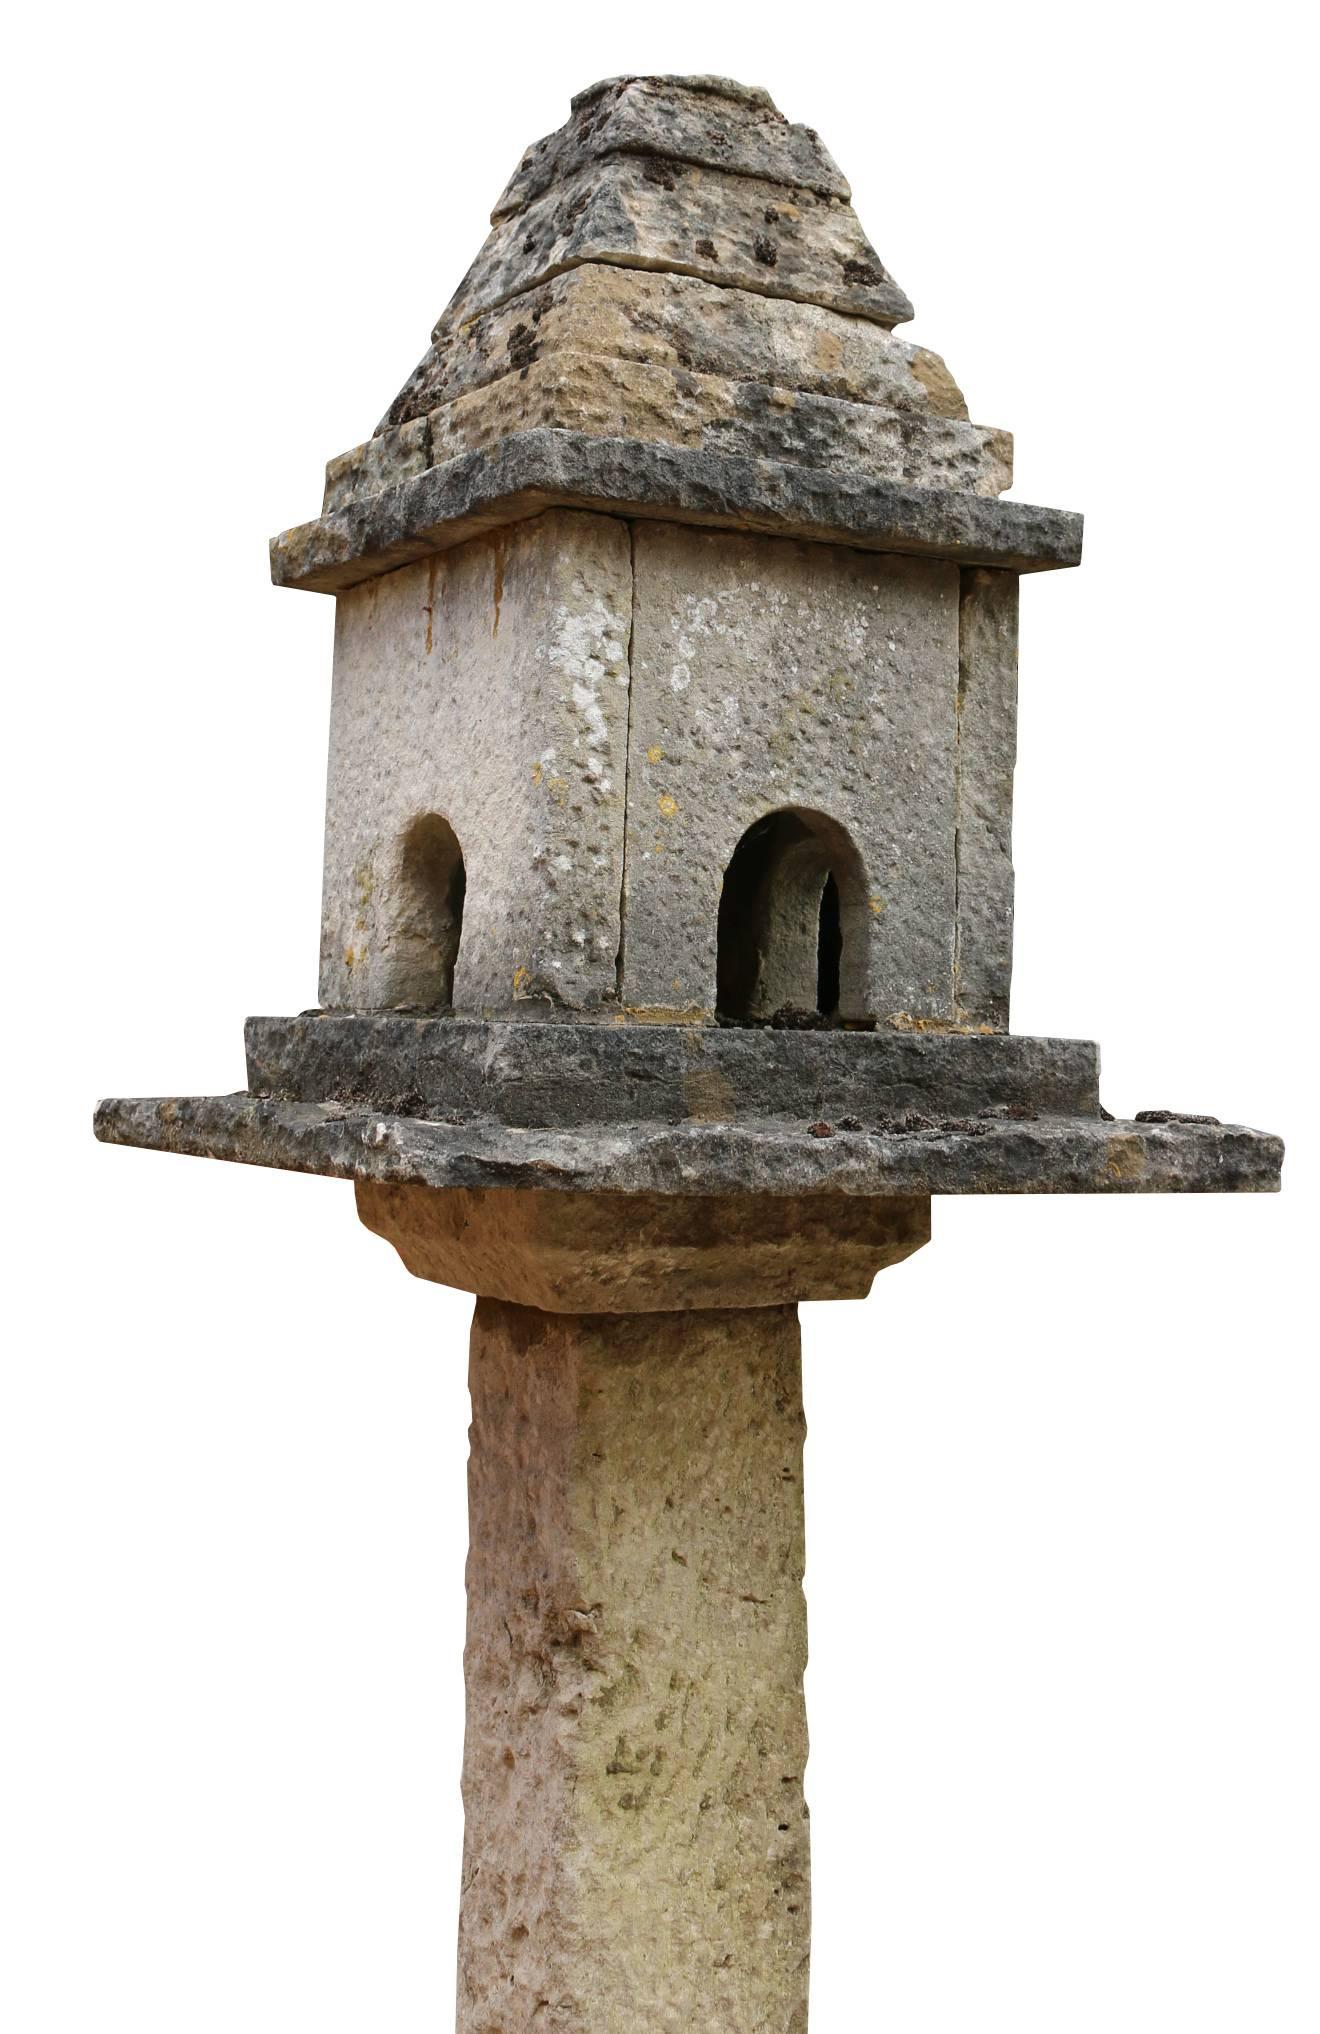 A very rare piece, in good condition.
This bird house comes in three pieces will require reassembling.
Measures: Height 216.5 cm
Base 30.5 cm x 30.5 cm
Widest part 60 cm x 60 cm
Weight 300 kg.